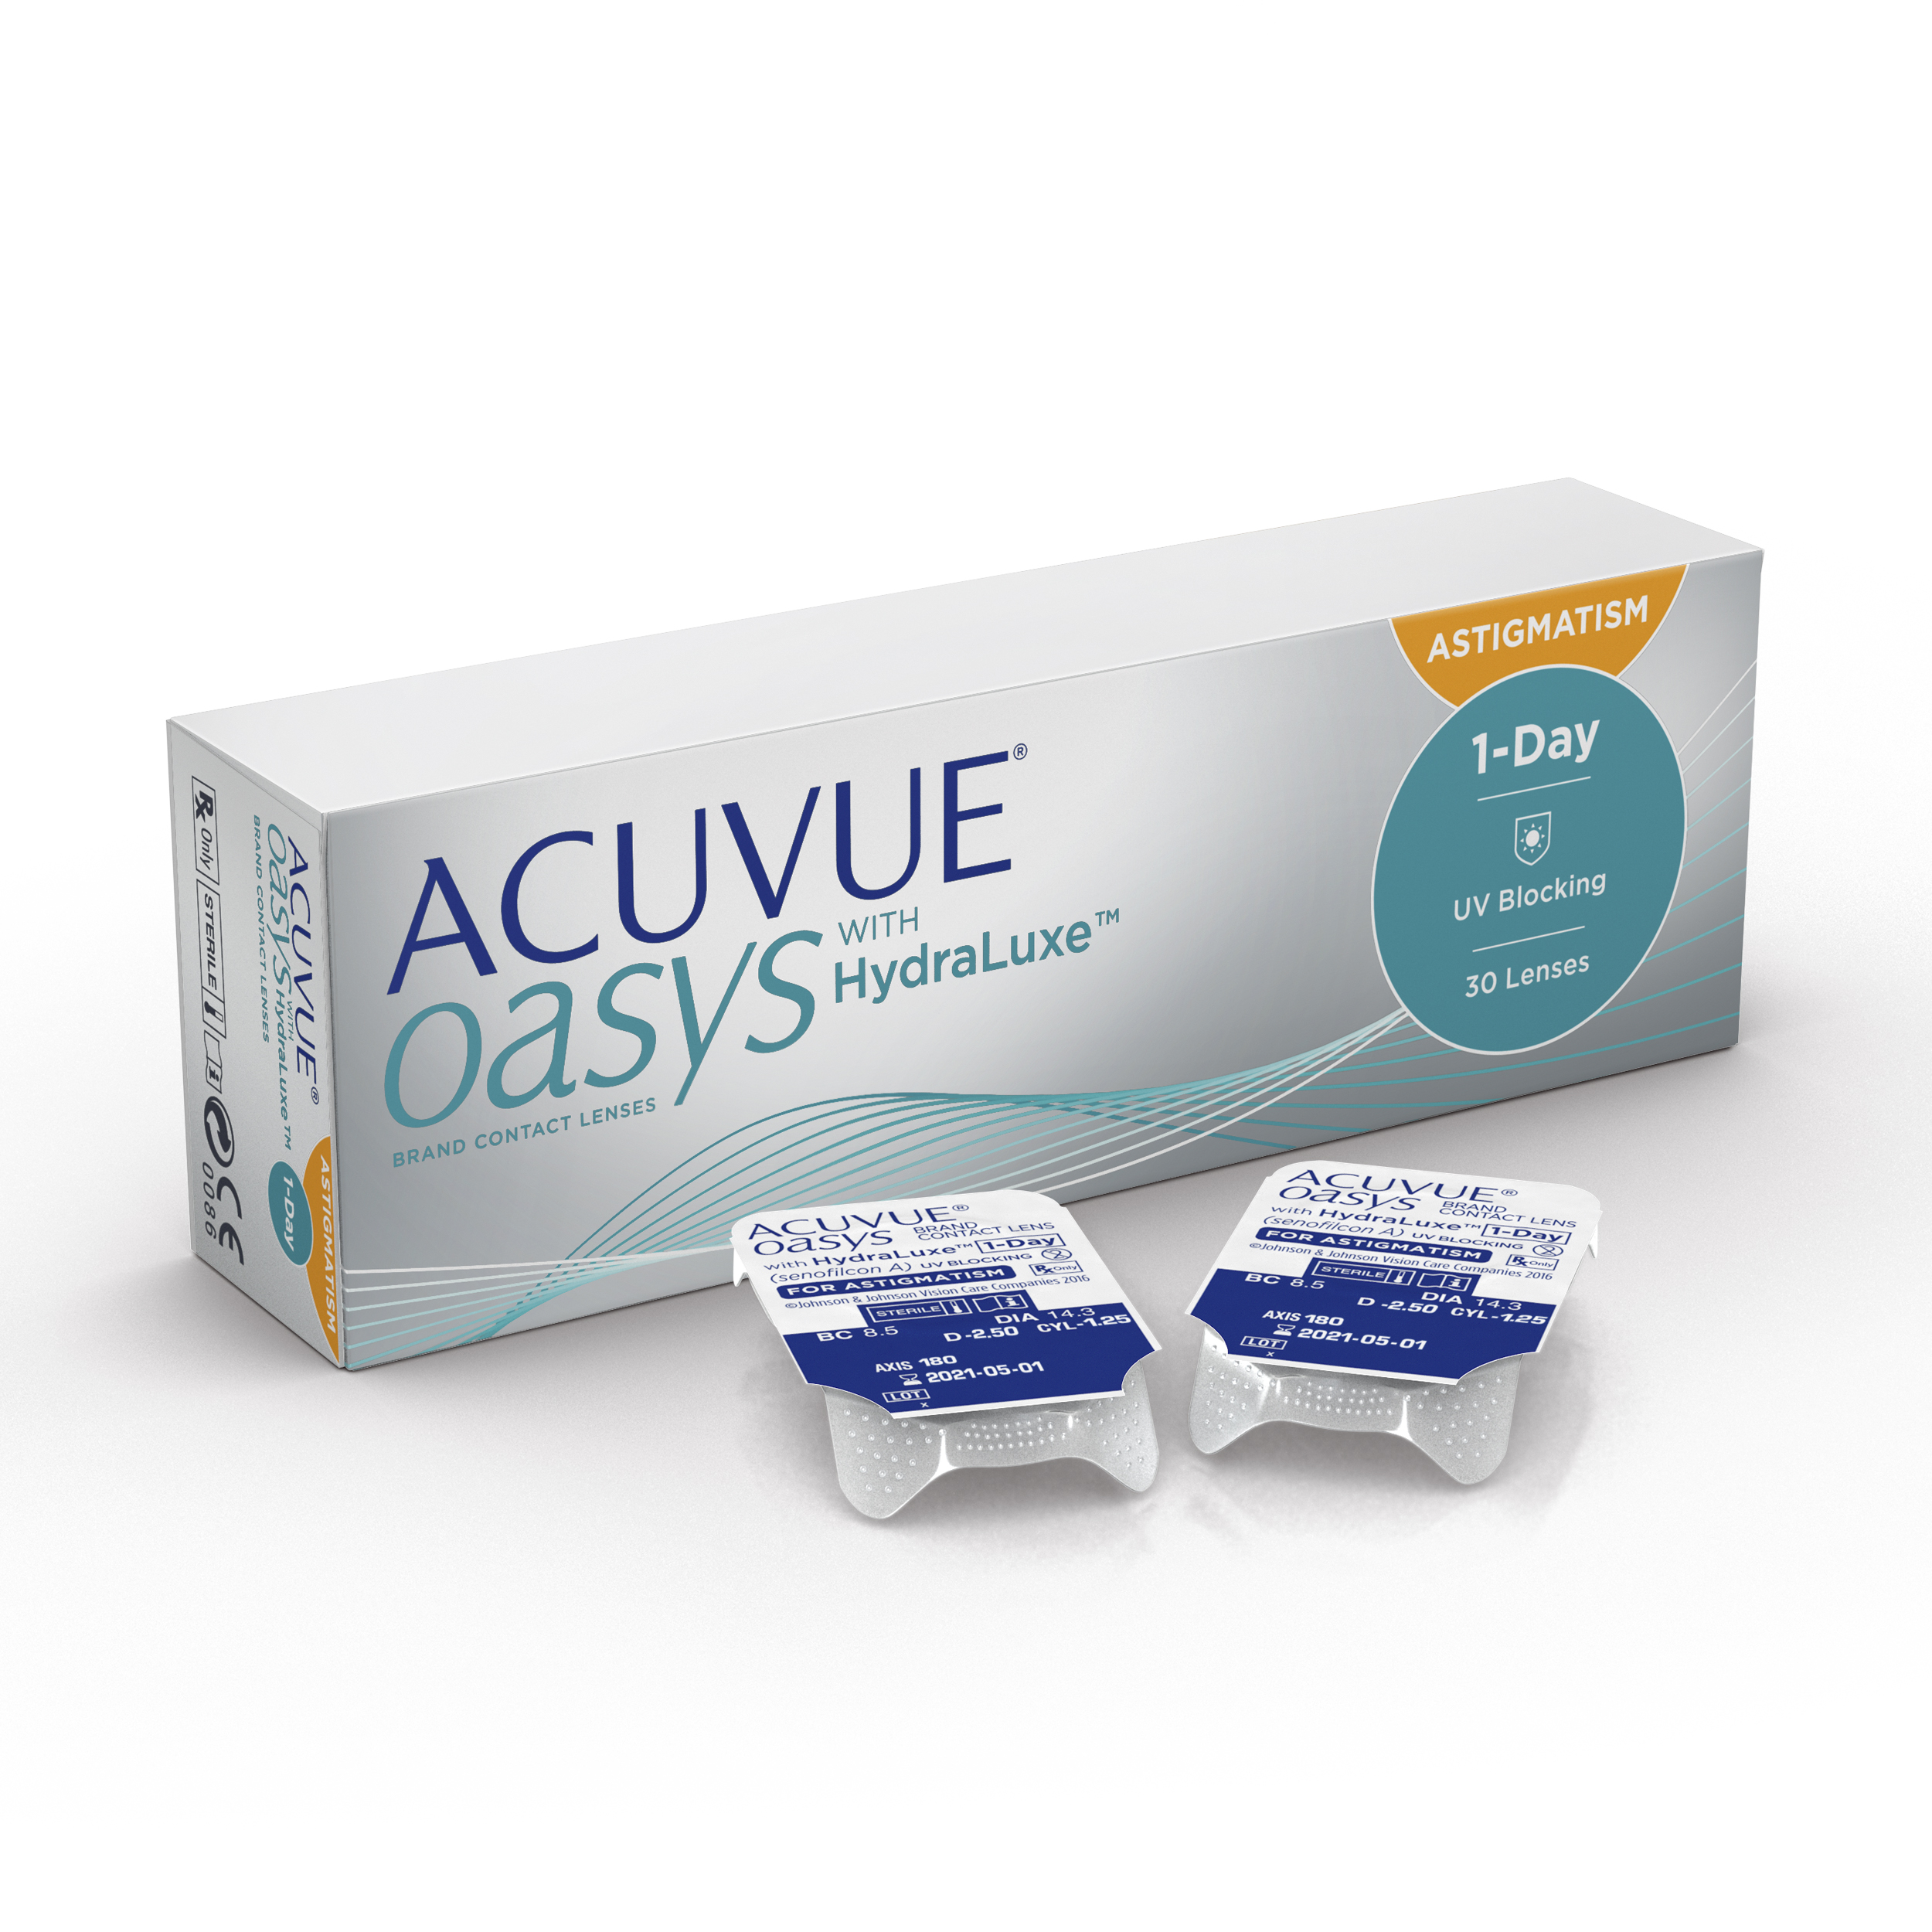 How Many Days Can You Wear Acuvue Oasys Contacts